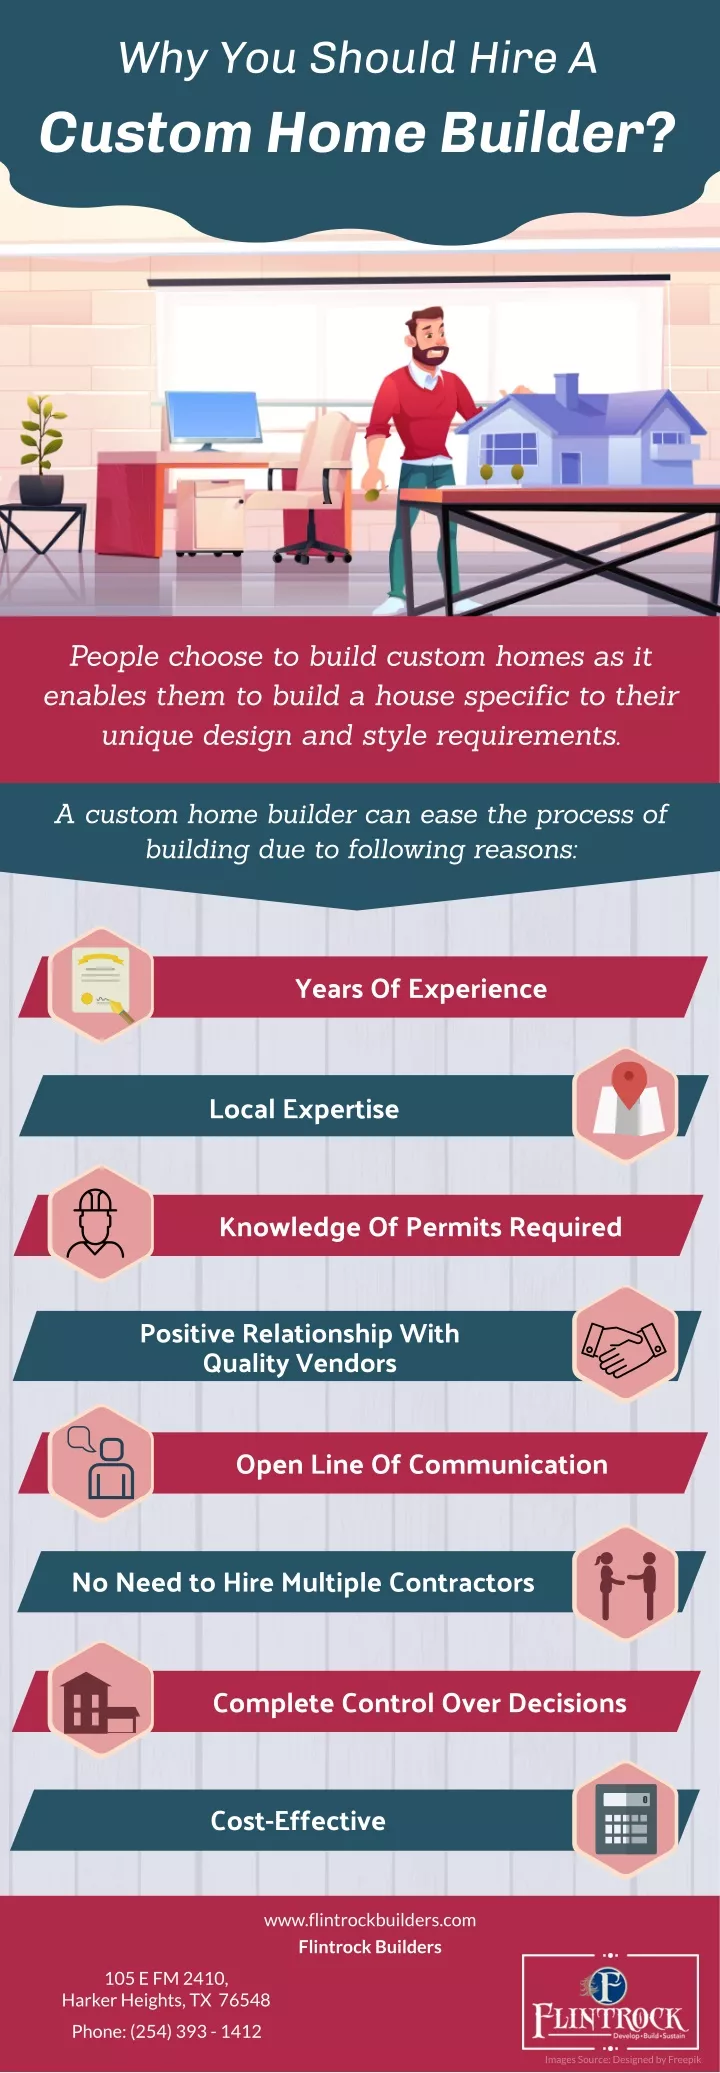 why you should hire a custom home builder